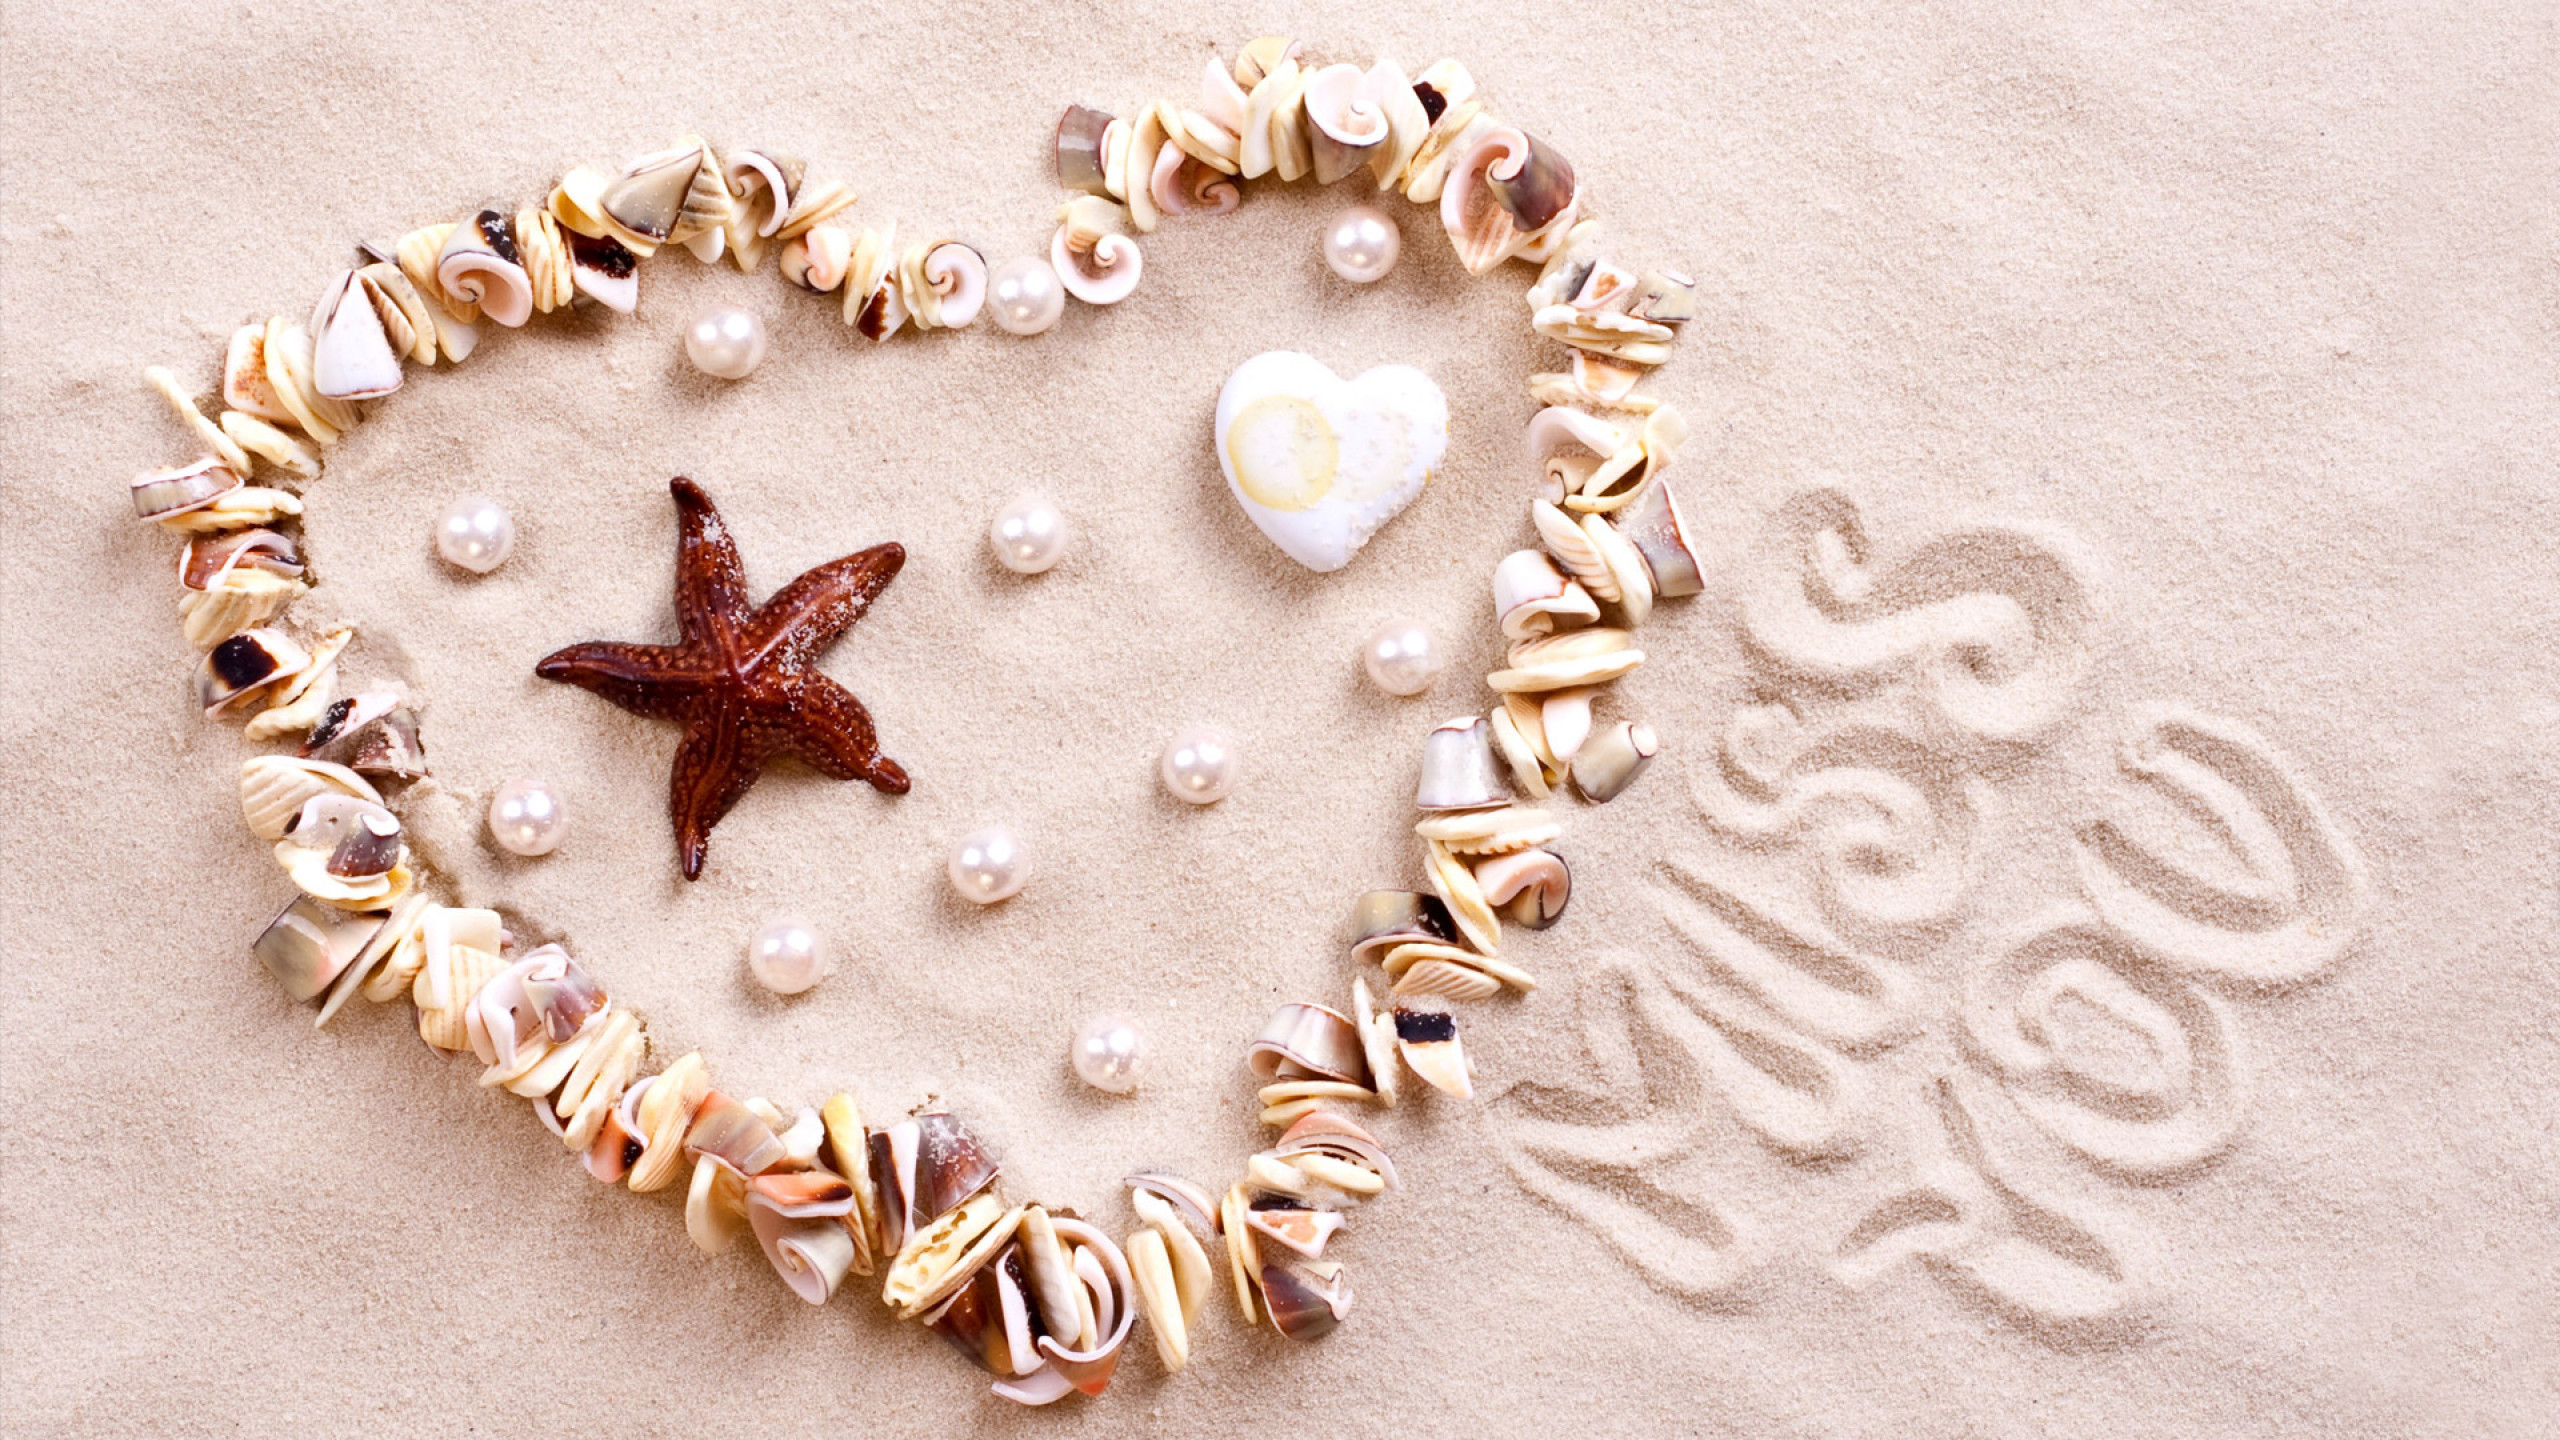 Stock Images love image, heart, starfish, shell, shore, 4k, Stock Images  #15304